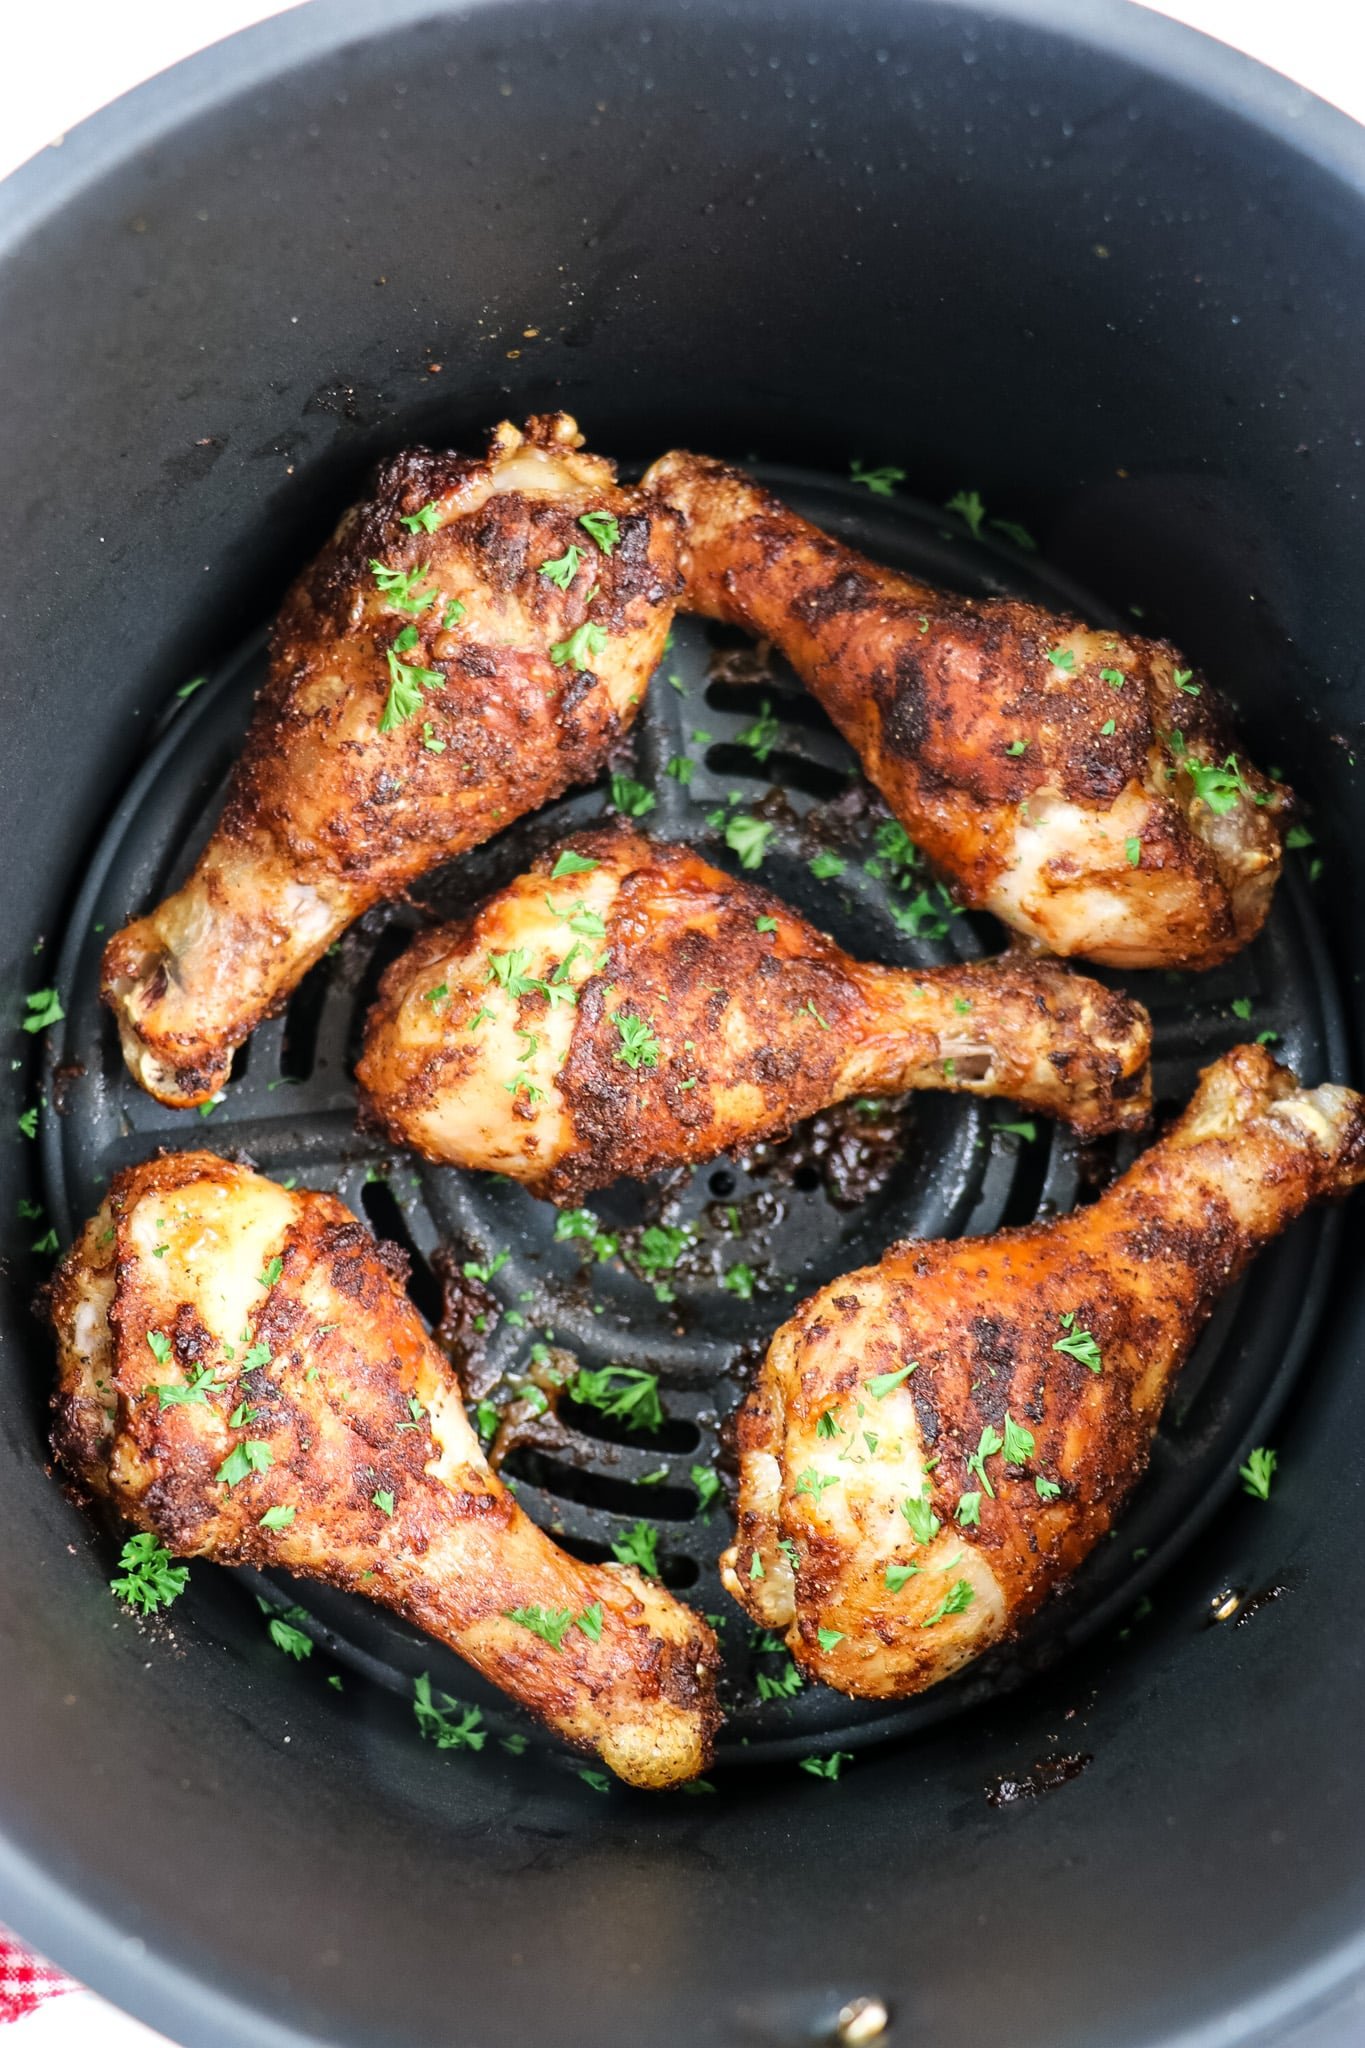 Drumsticks in air fryer after cooking, topped with fresh parsley.